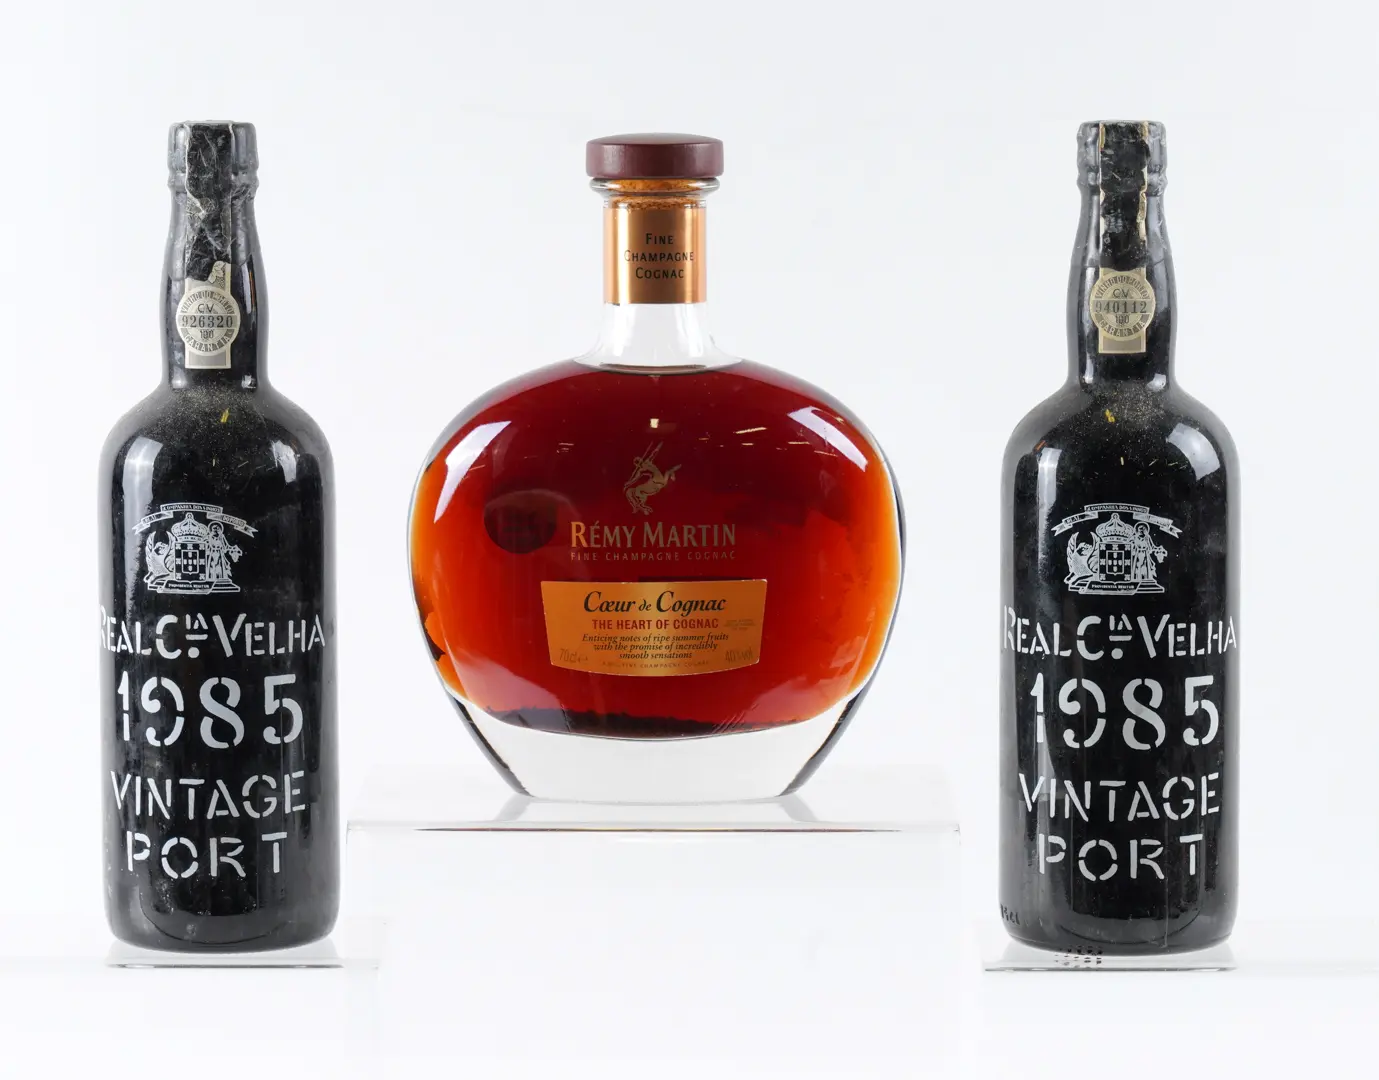 TWO BOTTLES OF REAL COMPANHIA VELHA VINTAGE 1985 PORT AND A BOTTLE OF REMY MARTIN COGNAC (3)